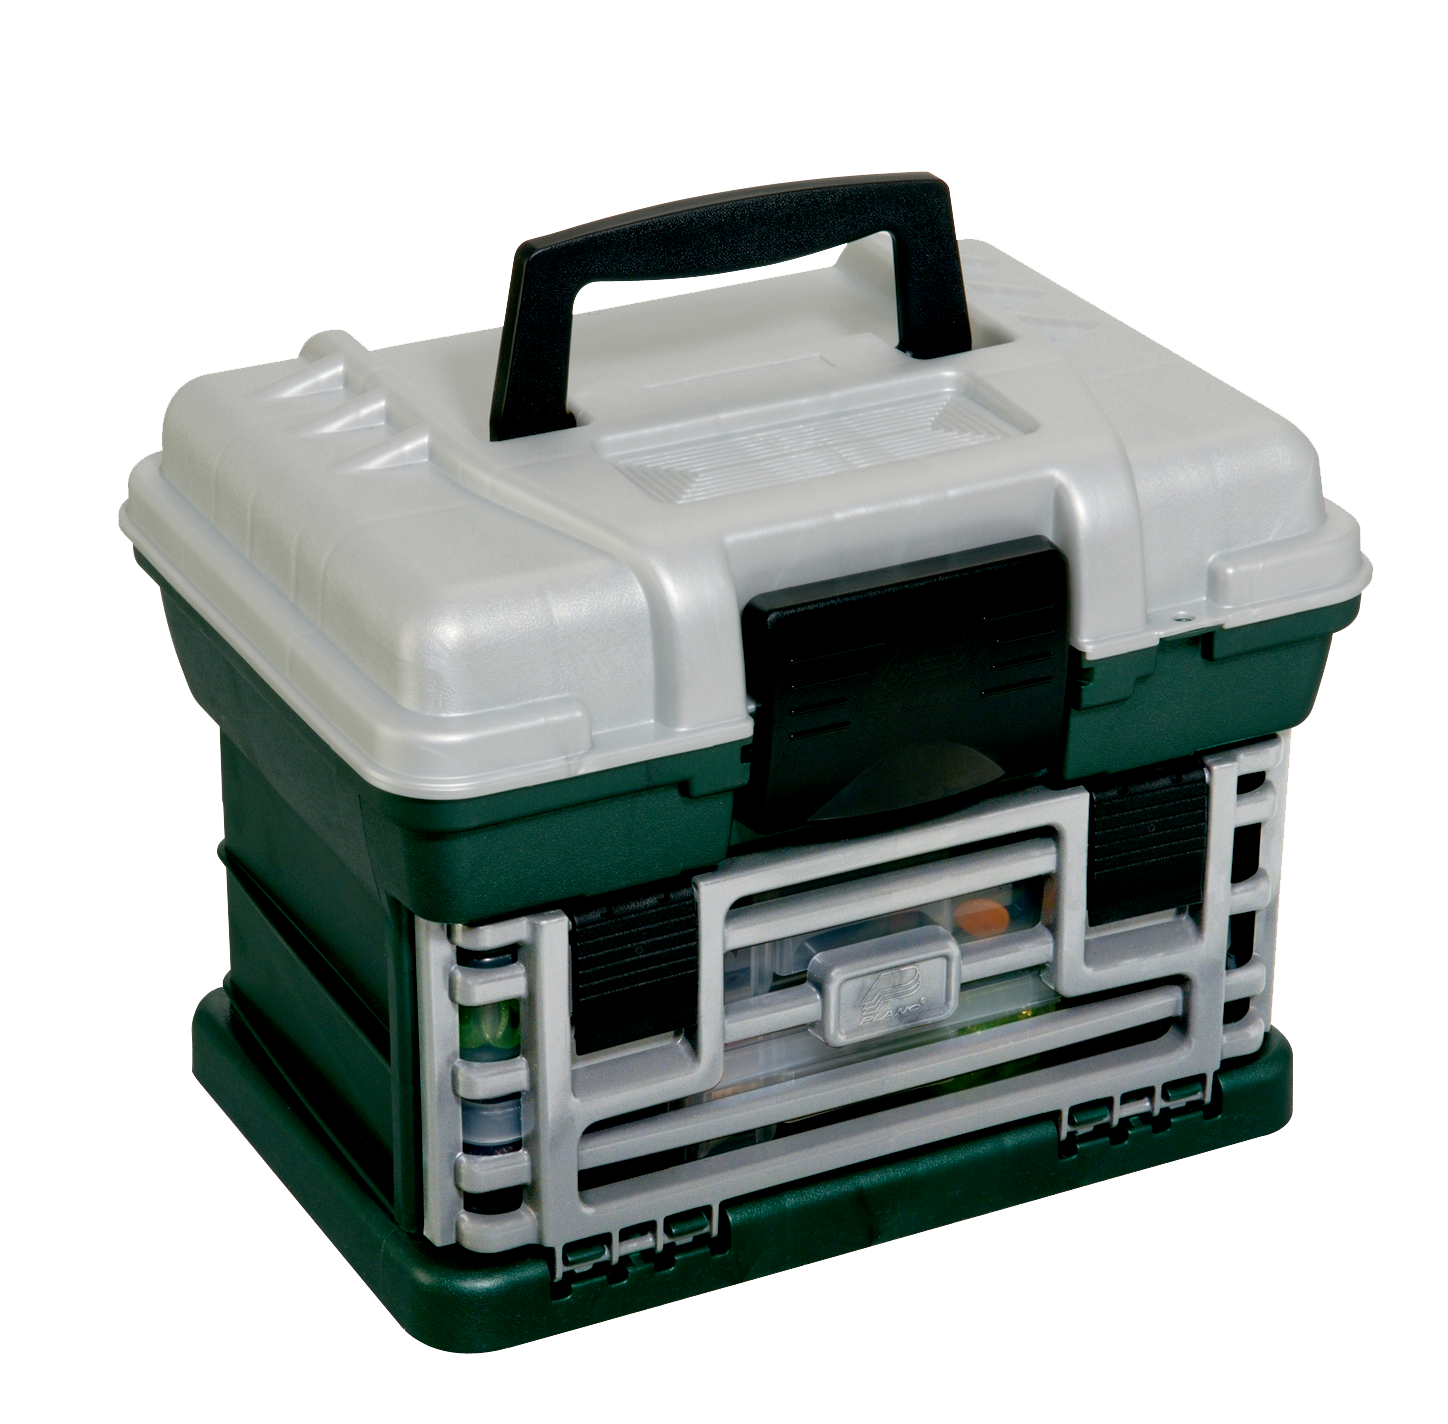 Plano 136200 2-BY Rack System Stow Away Fishing Tackle Storage Box